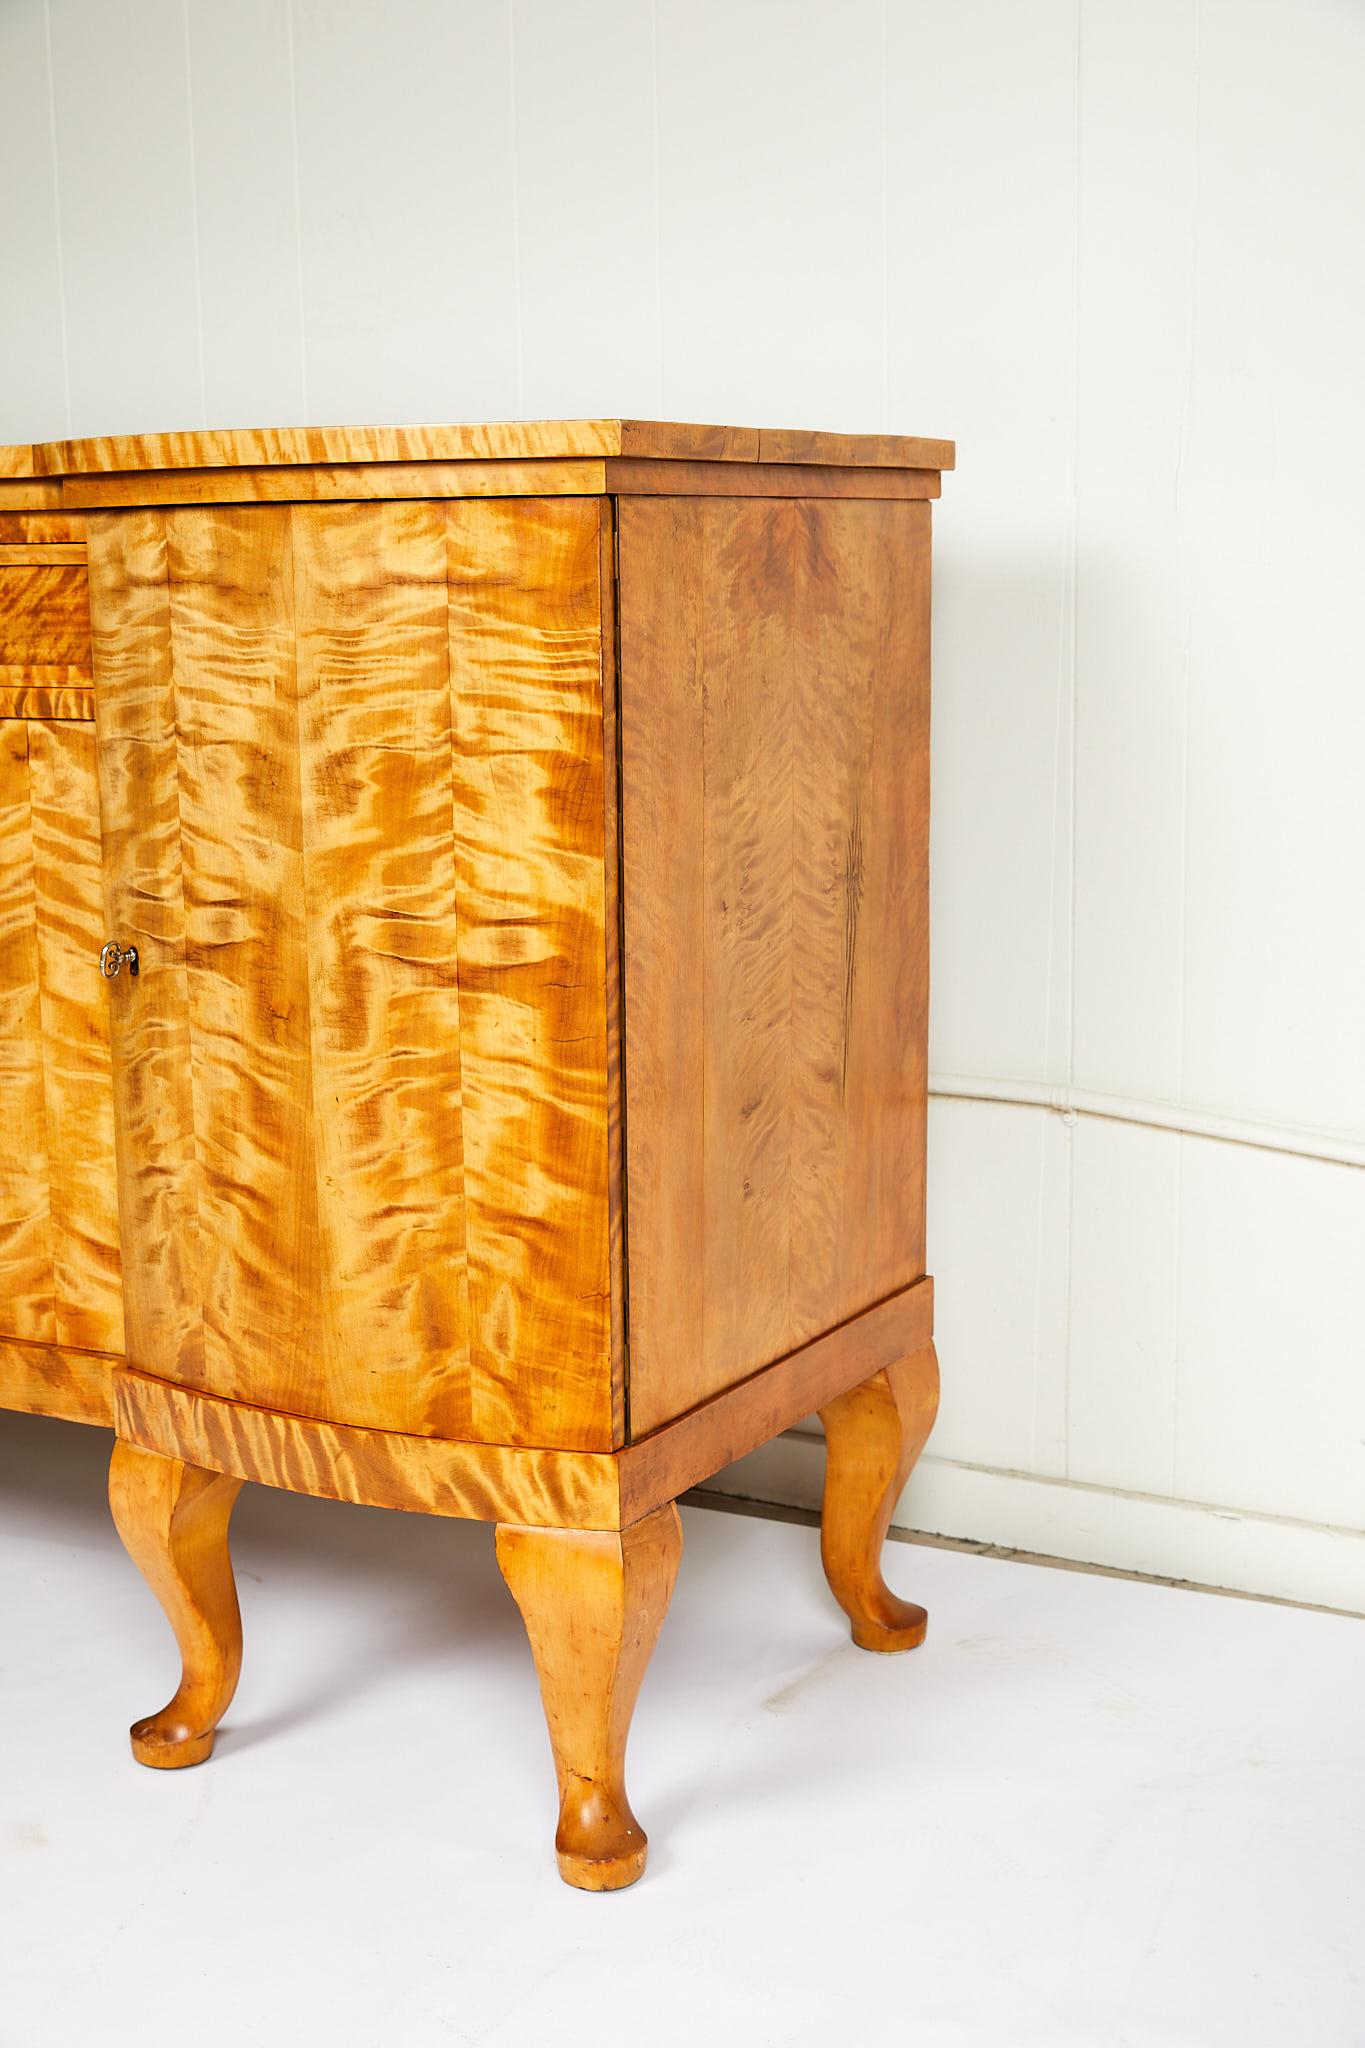 20th Century Swedish Art Deco Sideboard of Bookmatched Golden Flame Birch